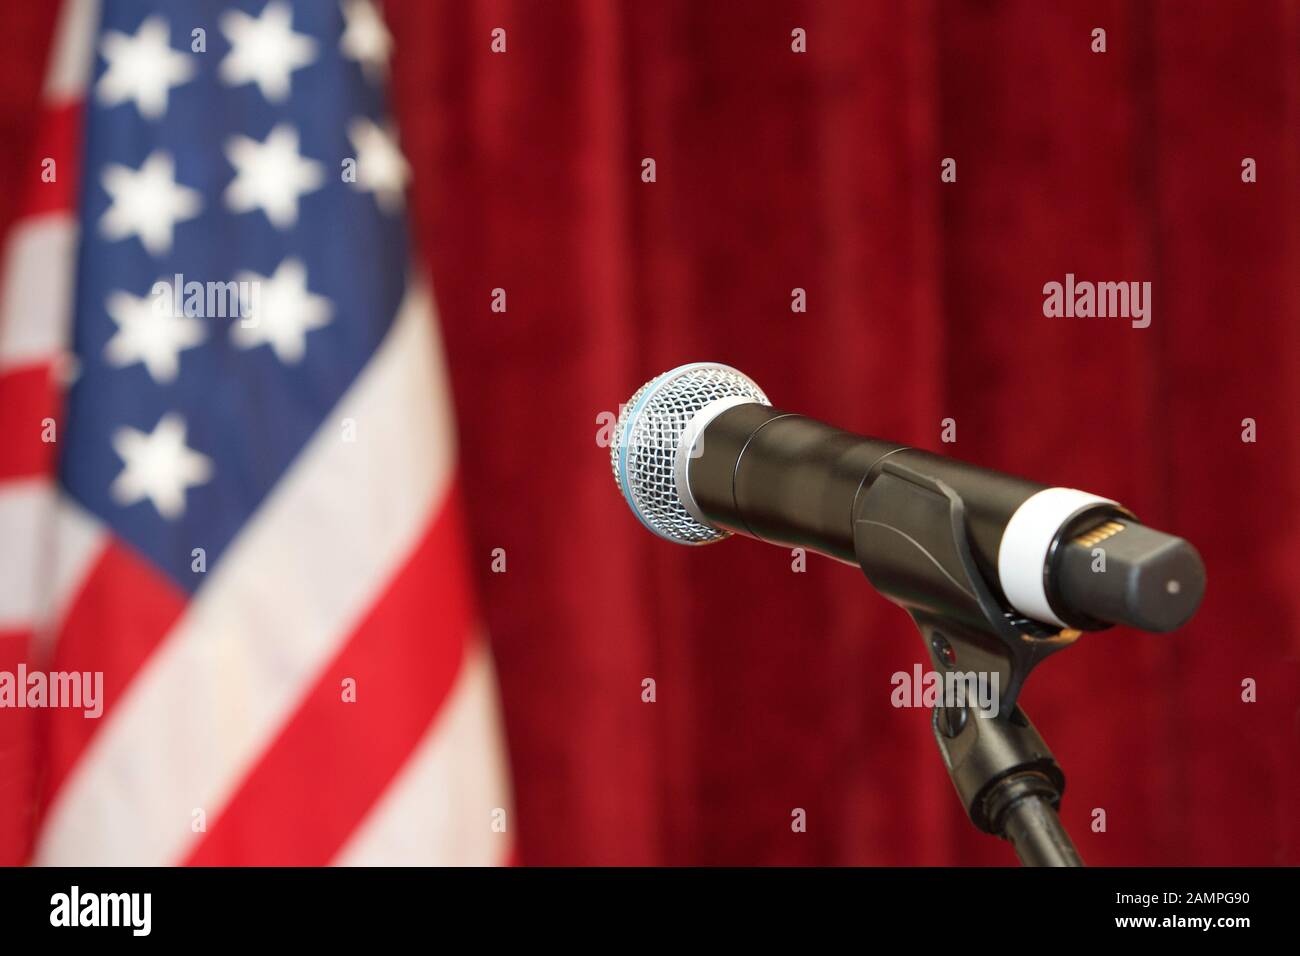 Wireless microphone on stand with American flag in the background. Stock Photo